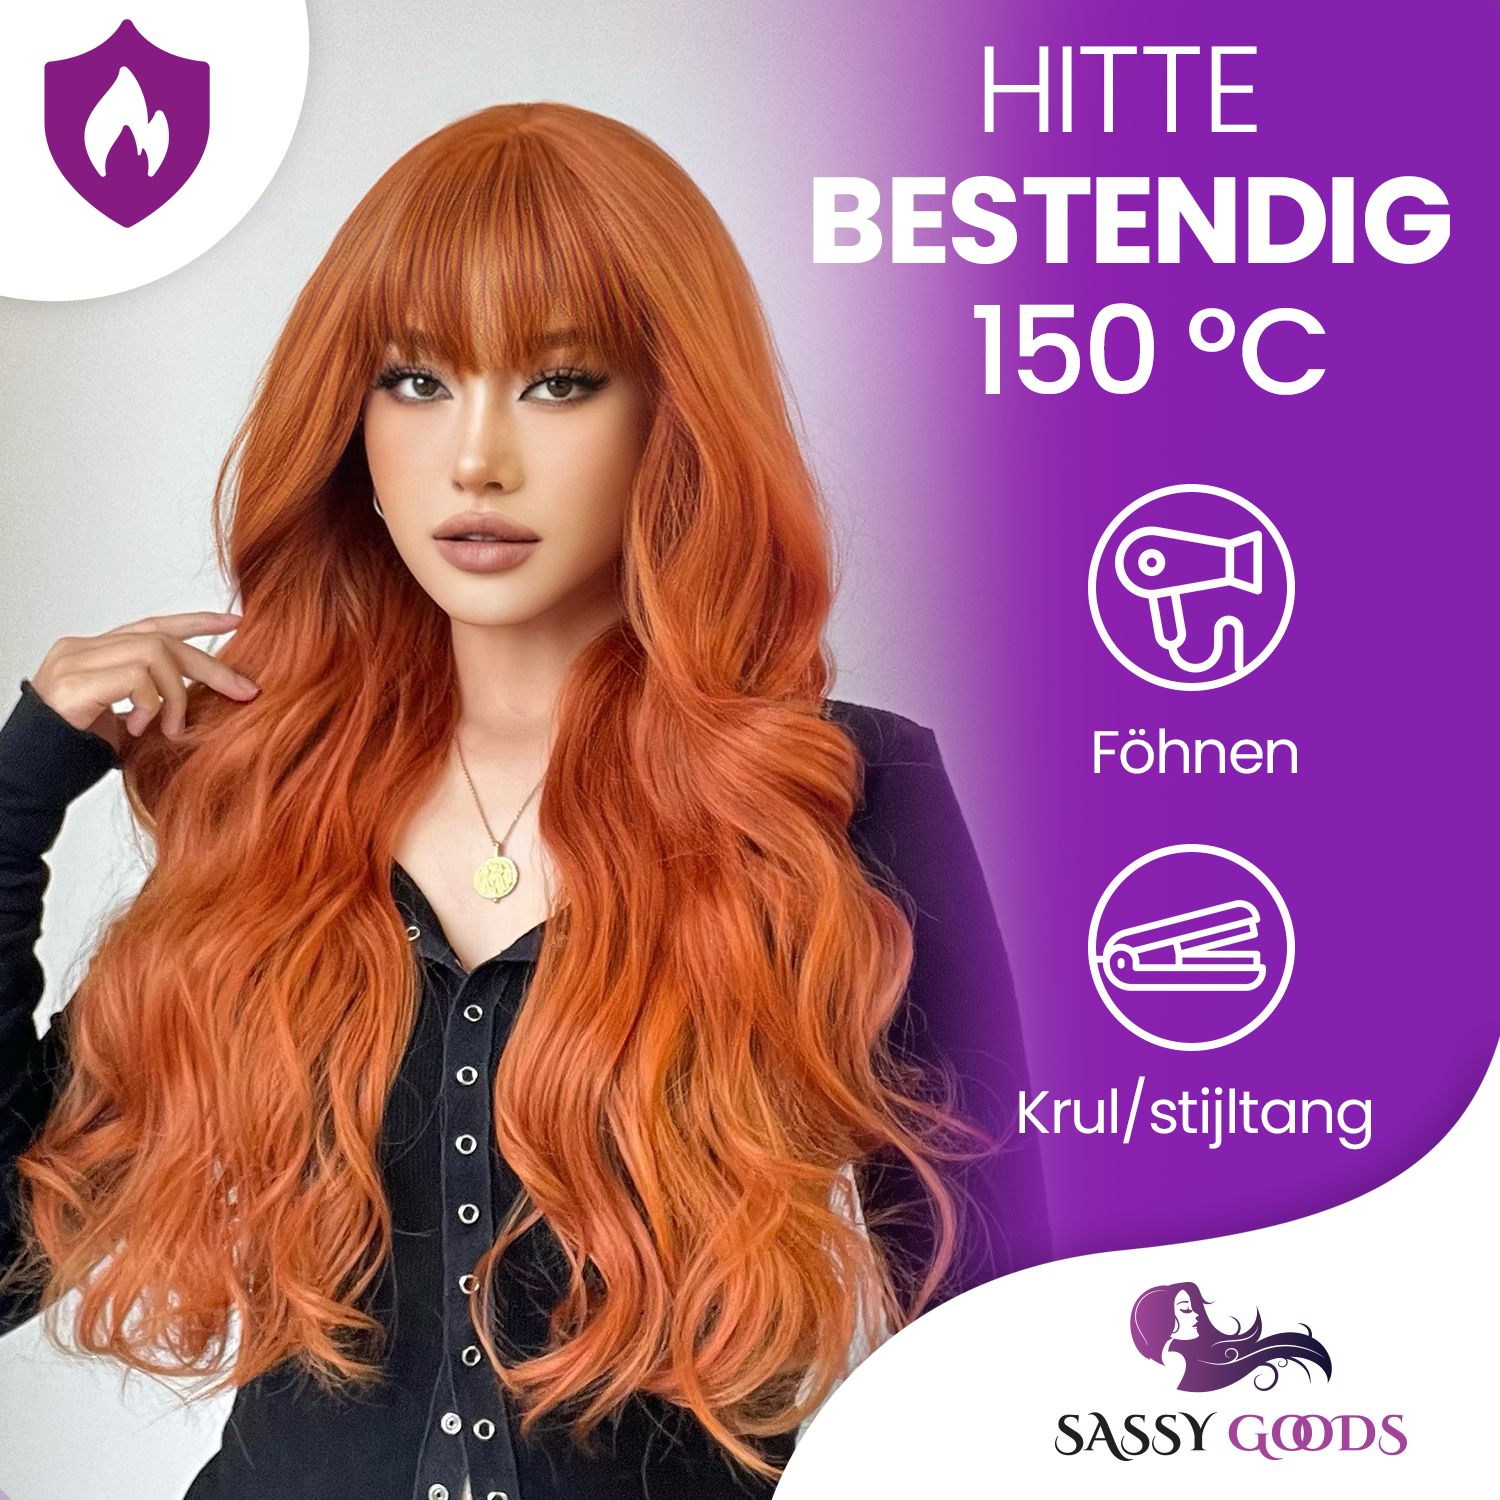 PRE ORDER Copper Red Wig with Bangs - Wigs Ladies Long Hair - Ginger - 70 cm